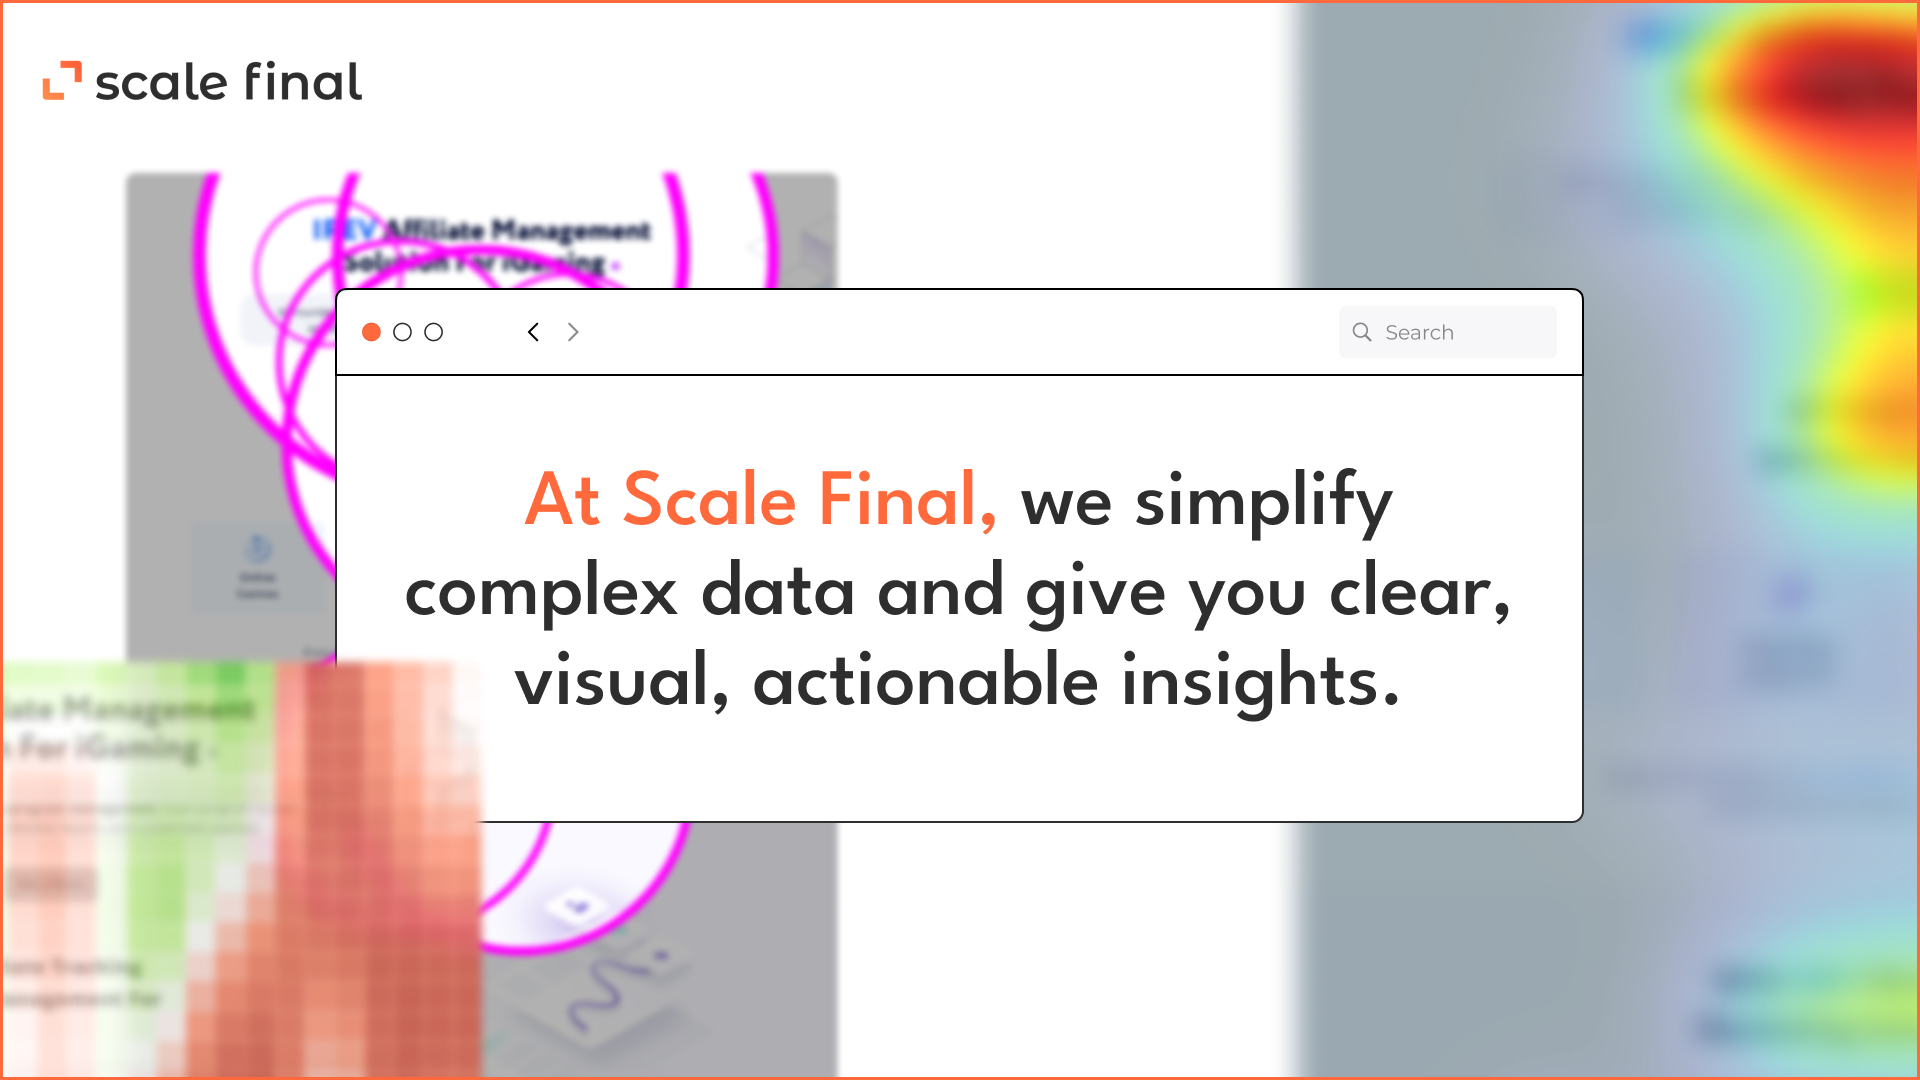 At Scale Final, we simplify complex data and give you clear, visual, actionable insights.